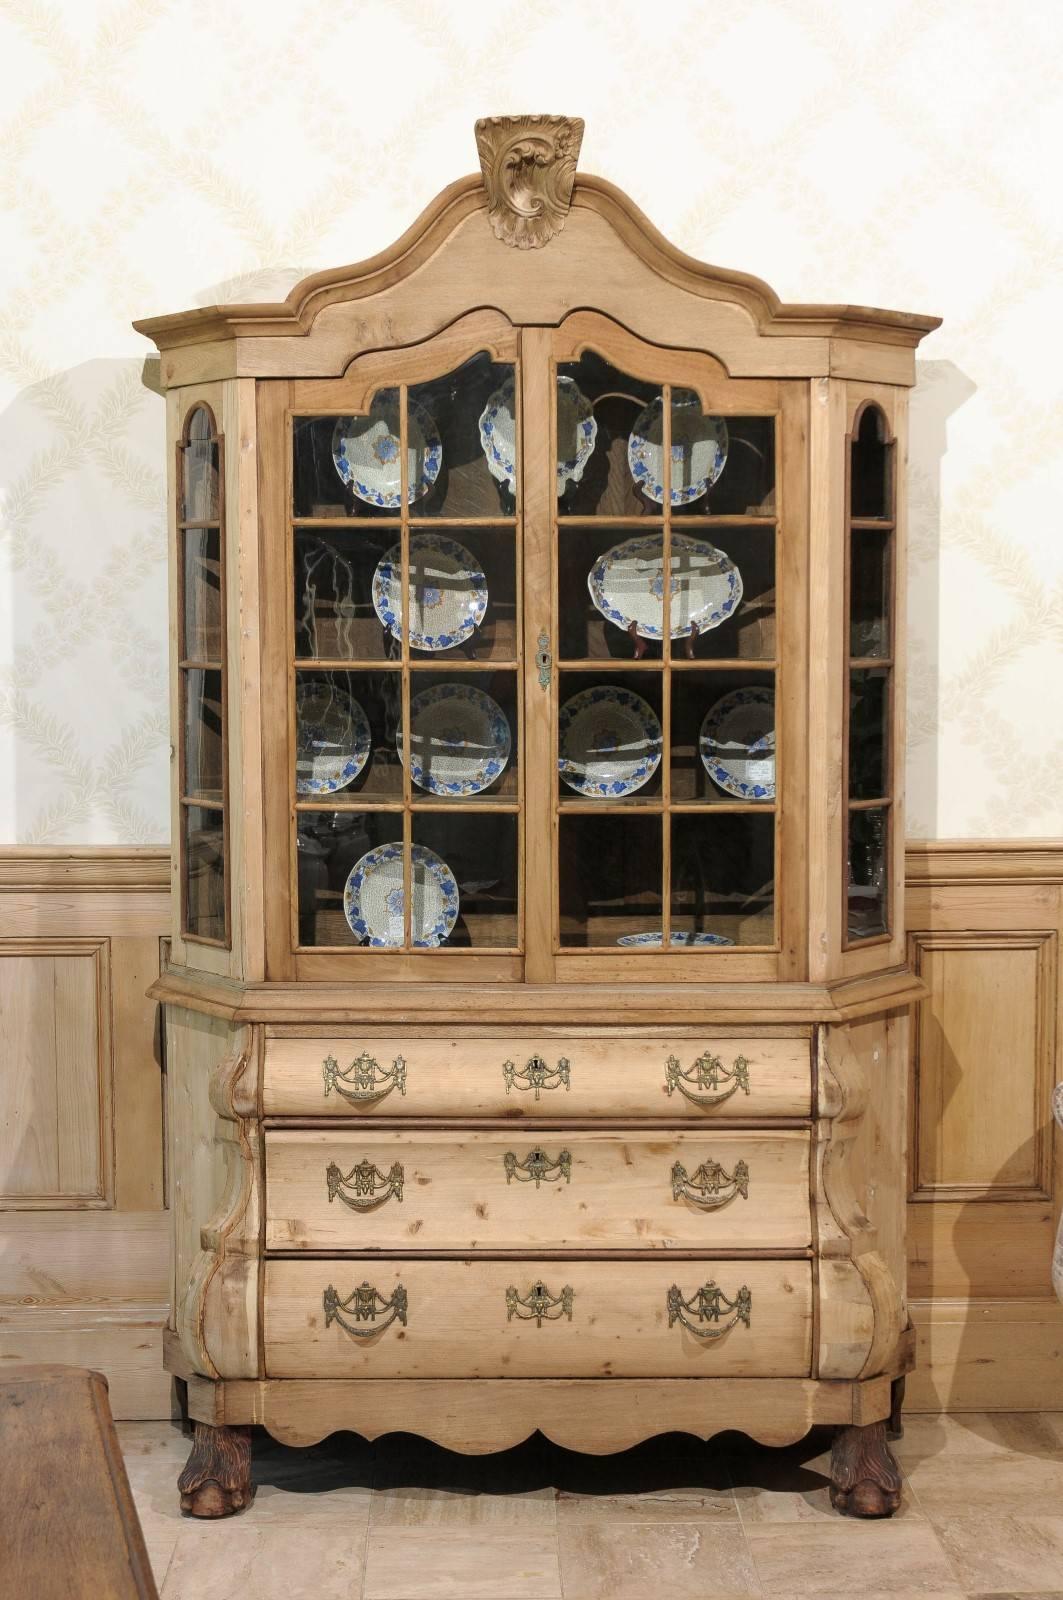 19th Century Glazed Pine Buffet Deux Corps, circa 1860
This is a stunning and eye-catching piece. The oversized feet and especially tall cornice give it a look that is classic Dutch. The glazed top is a bit unusual and provides an opportunity to